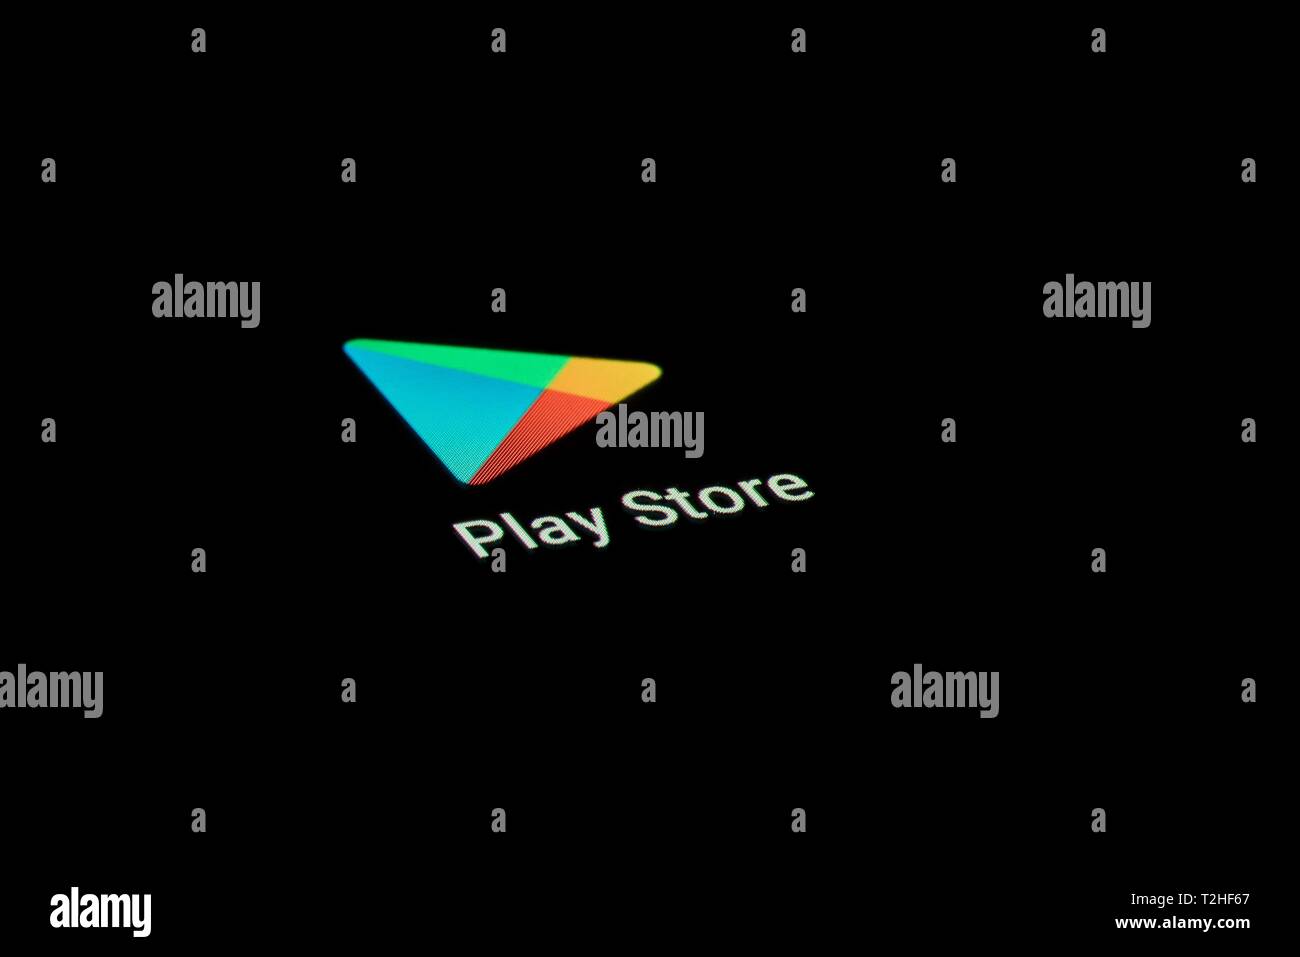 Play Store App icon on a display, Google, mobile phone, smartphone, tablet, Germany Stock Photo